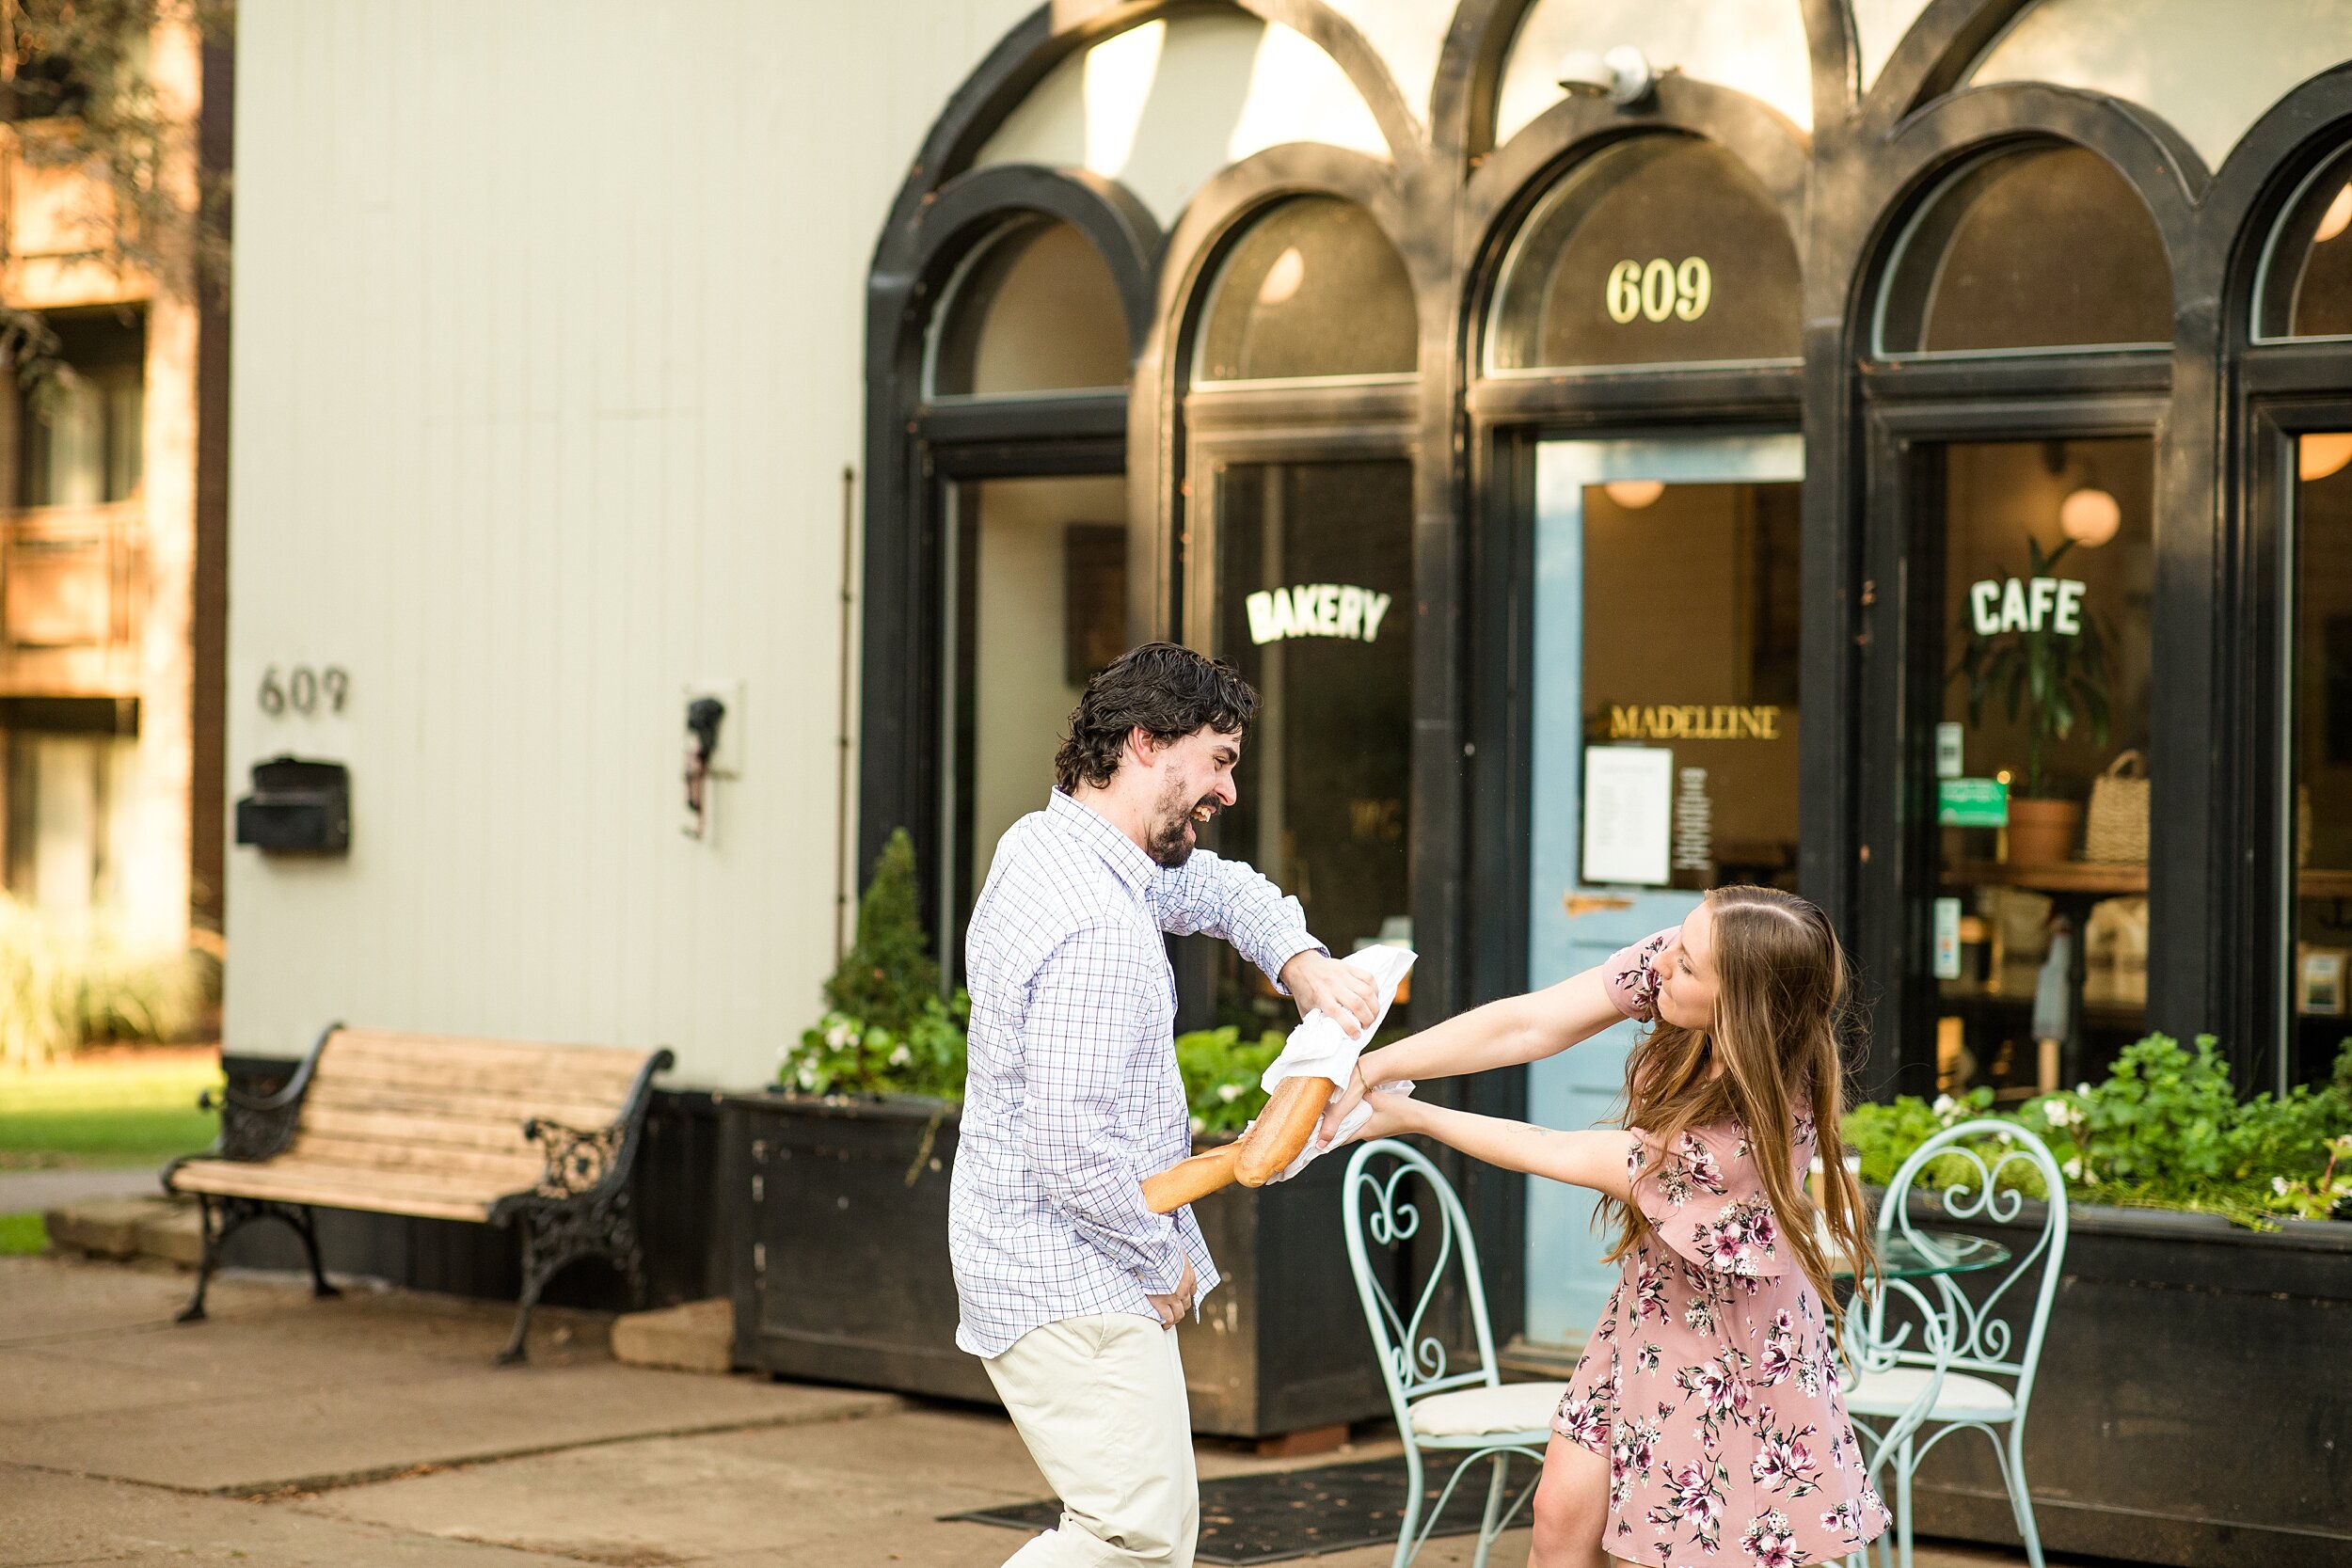 biddles escape pittsburgh, coffee shop engagement photos, madeleine bakery and bistro pittsburgh, pittsburgh engagement photographer